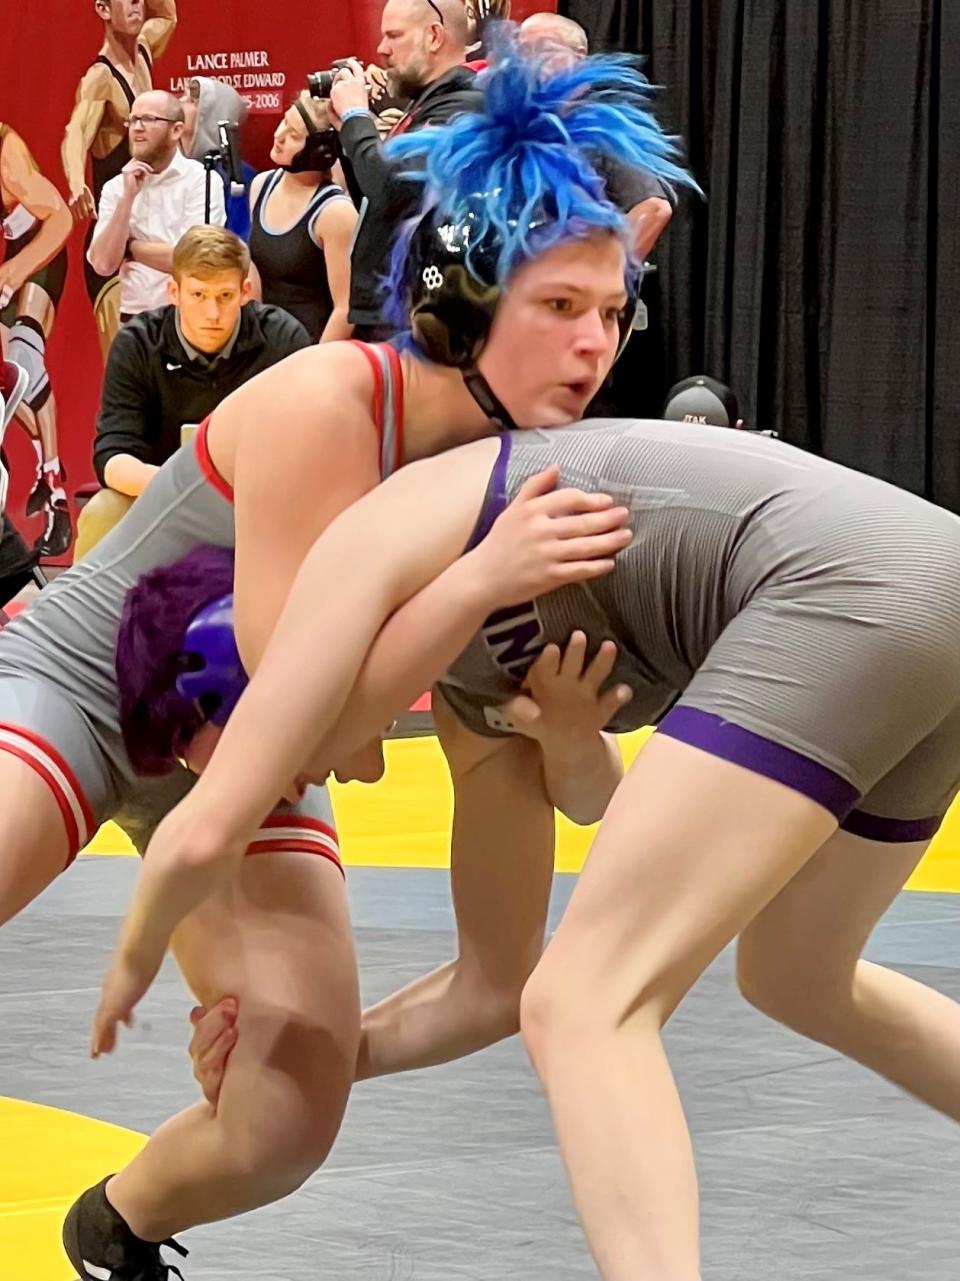 Elgin's Hallie Winslow wrestles at 115 pounds at last year's state tournament at Ohio State. She won the River Valley Girls Wrestling Tournament at 120 pounds over the holiday break.